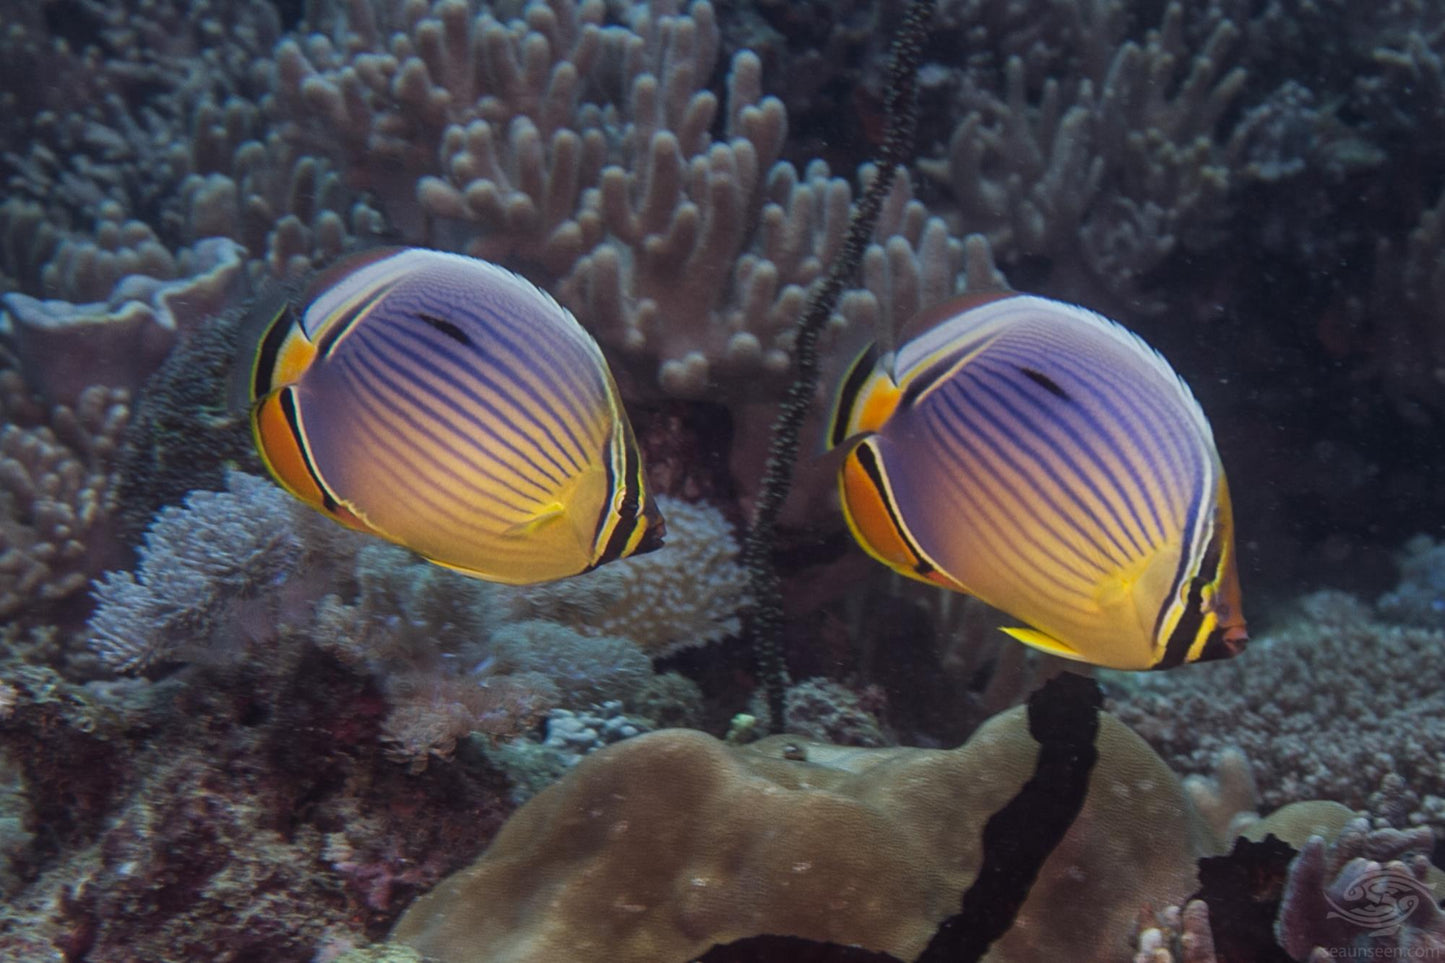 Melon Butterflyfish Size: S 2" to 2.5"